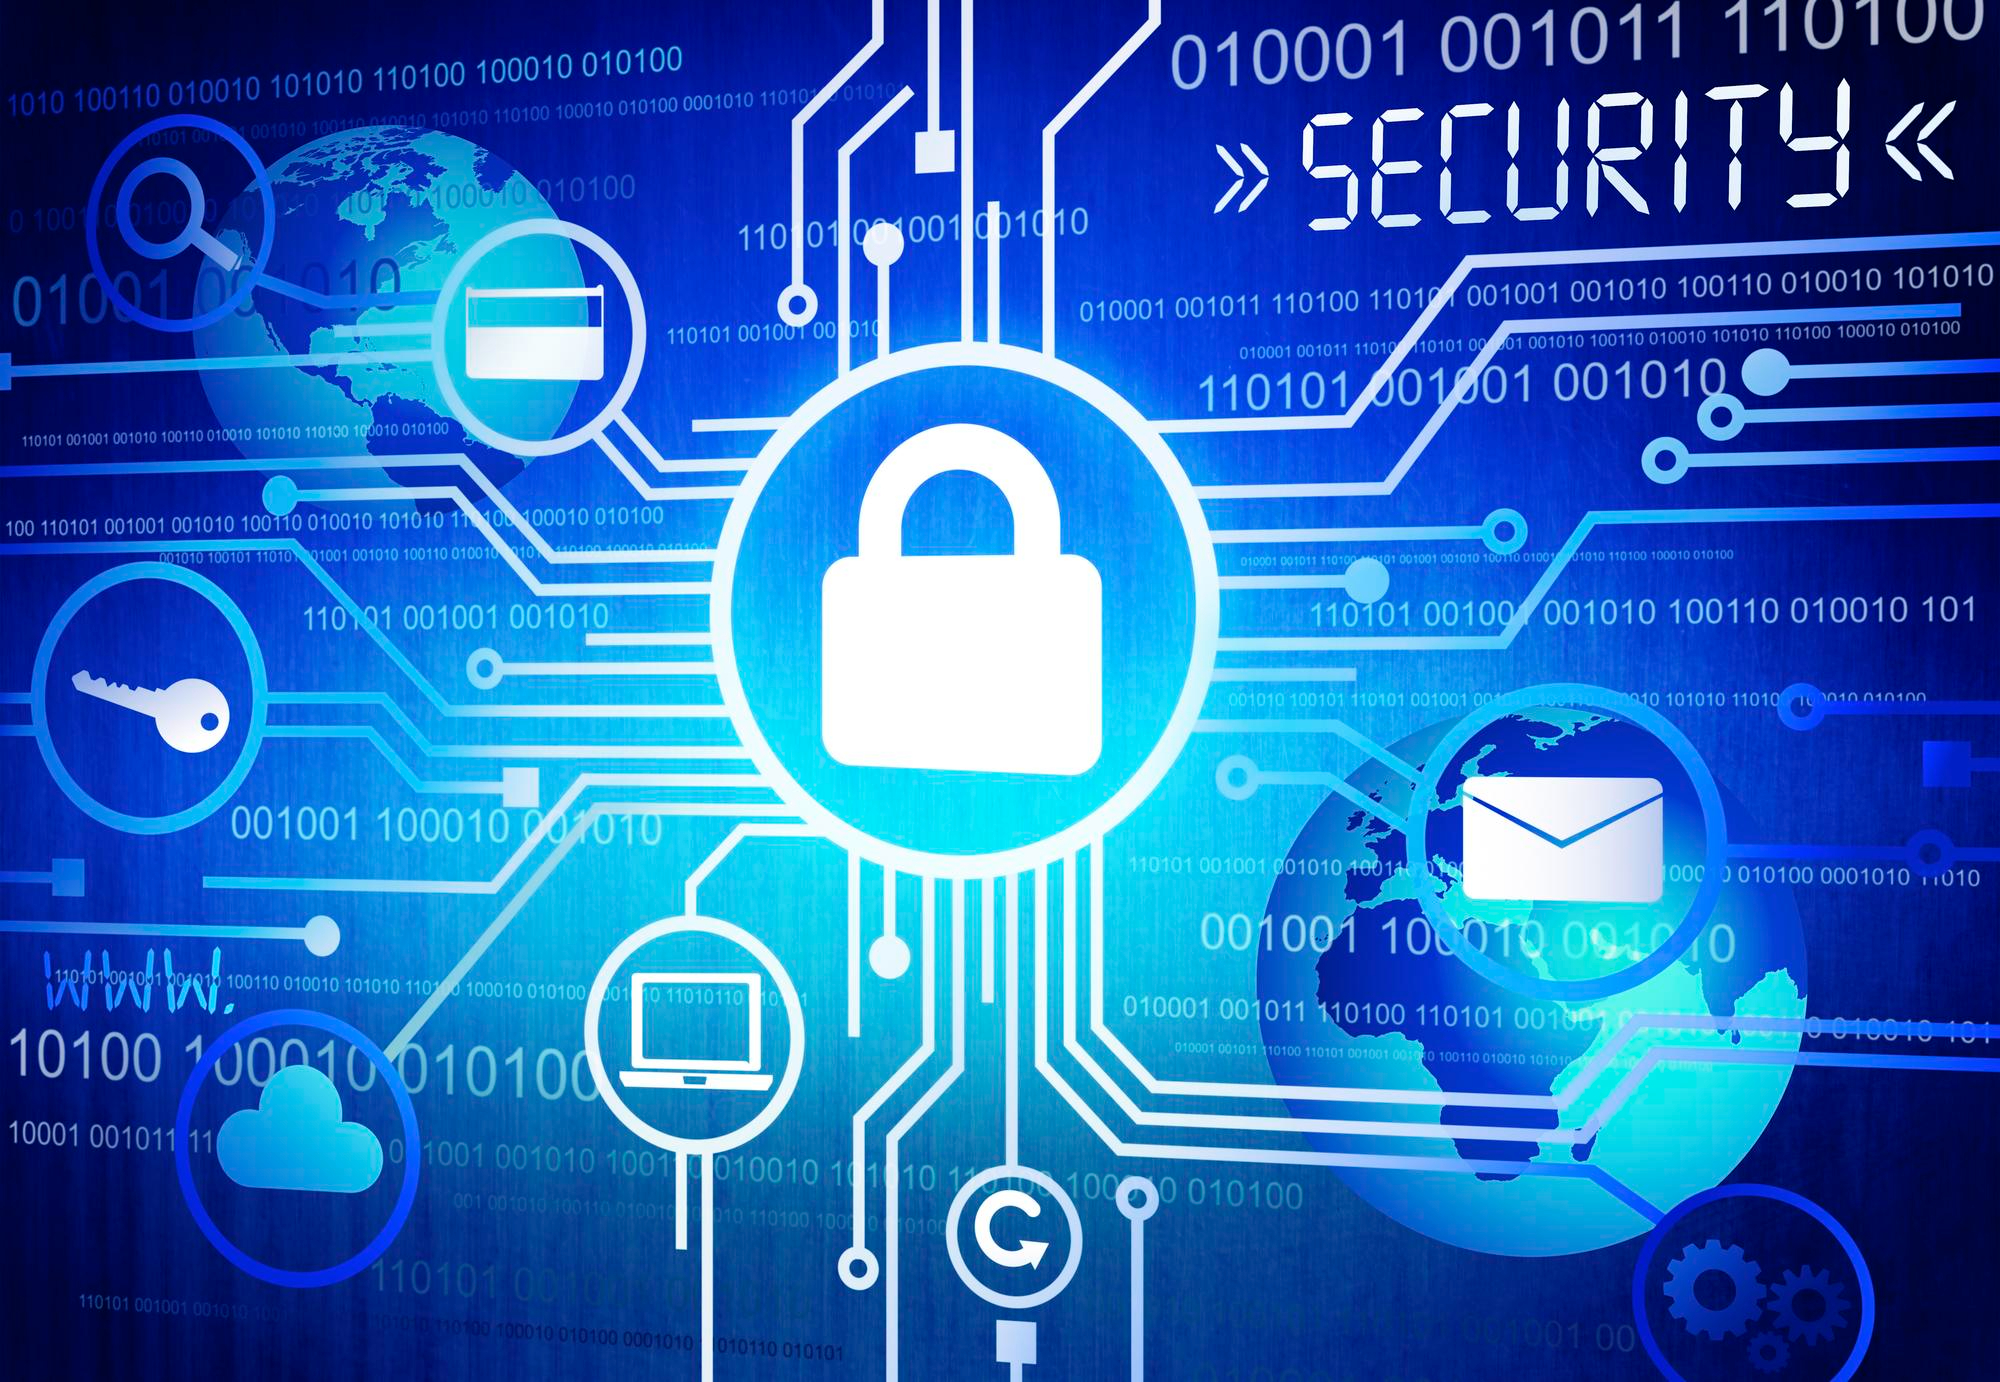 Cybersecurity: Safeguarding the Digital Frontier